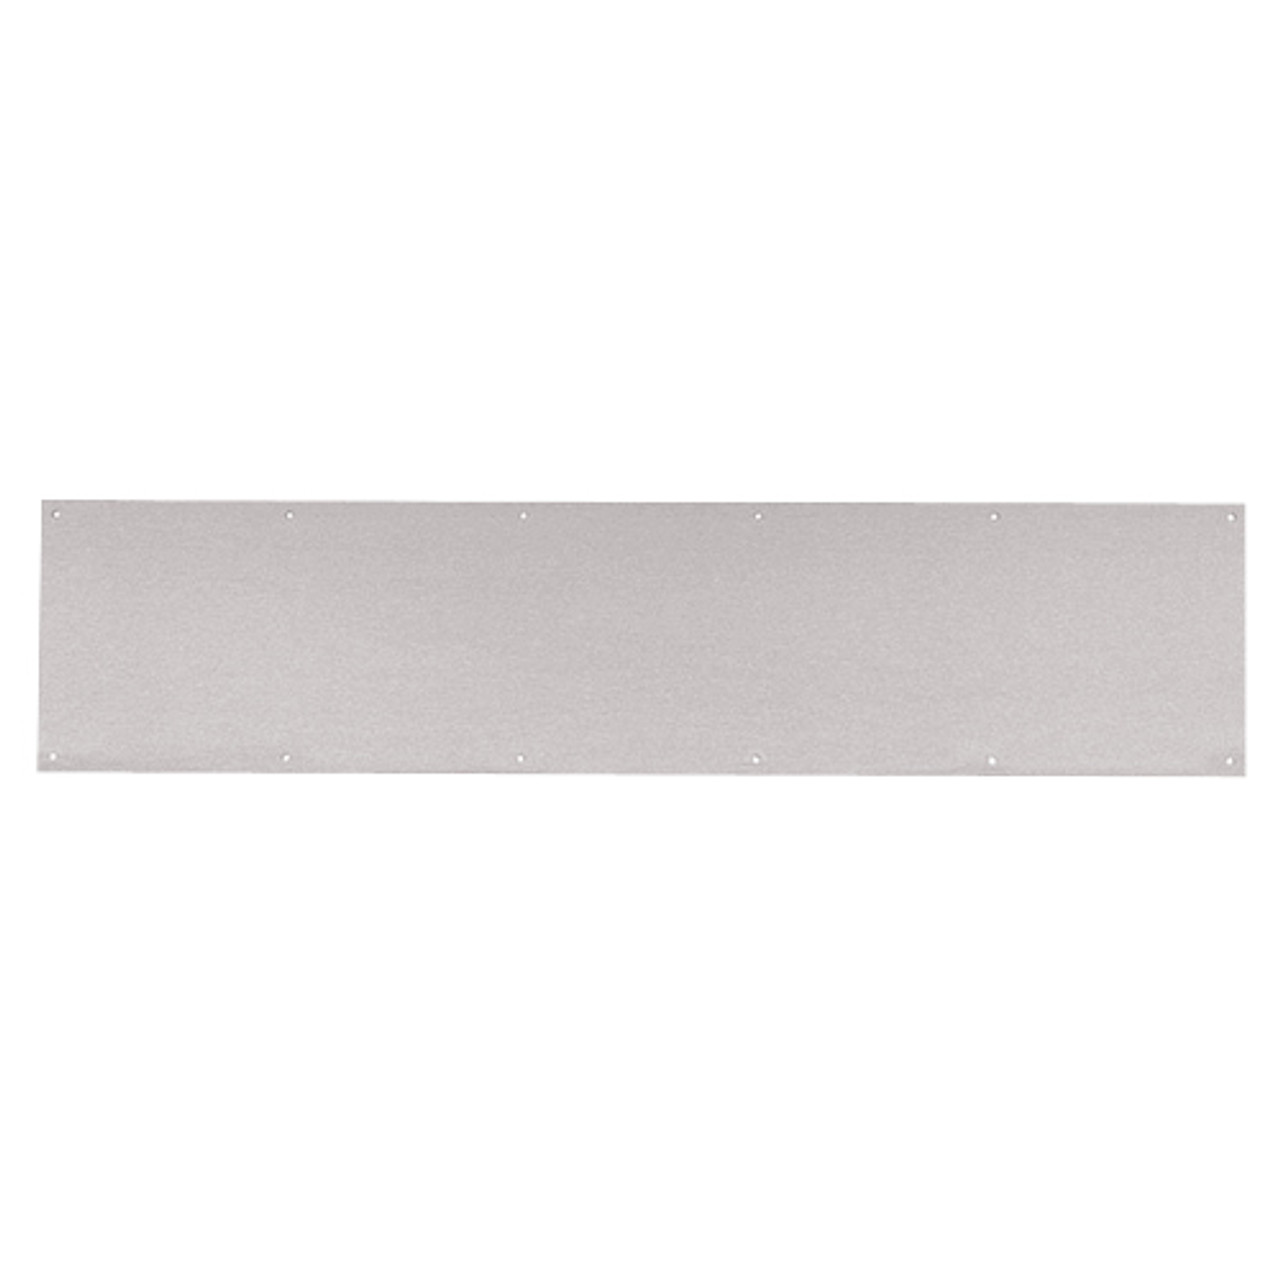 8400-US32D-30x32-B-CS Ives 8400 Series Protection Plate in Satin Stainless Steel